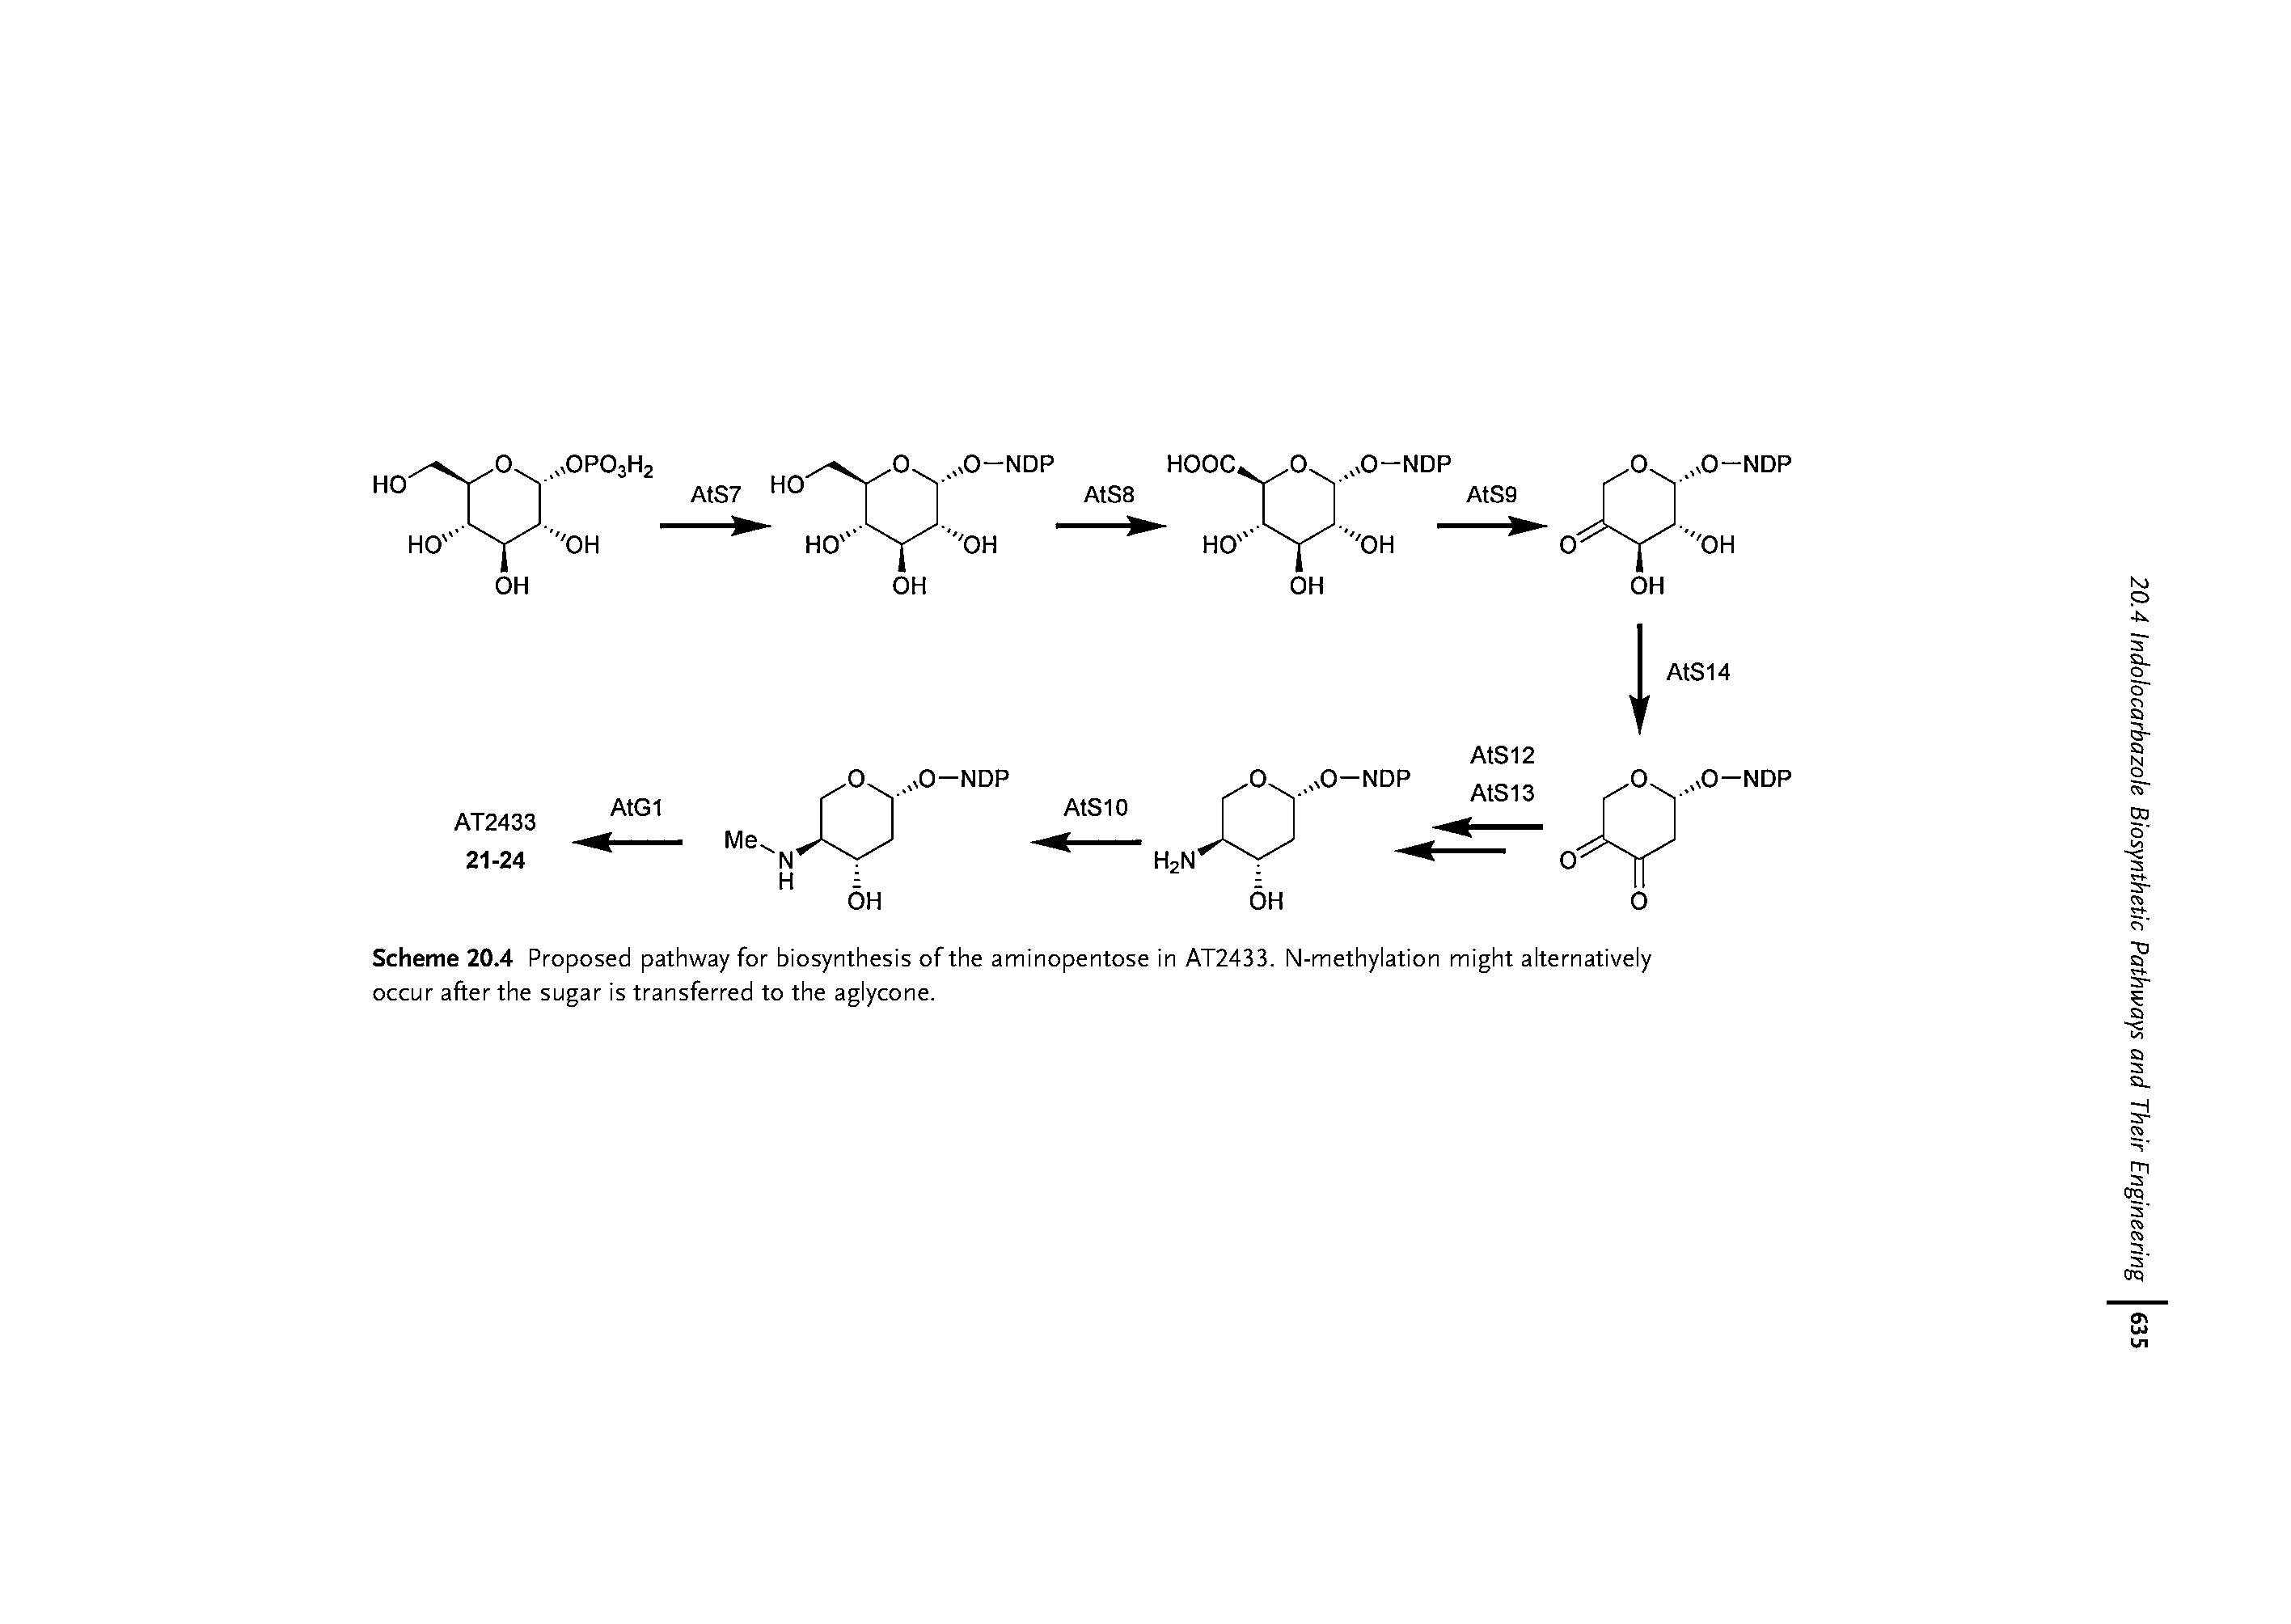 Scheme 20.4 Proposed pathway for biosynthesis of the aminopentose in AT2433. N-methylation might alternatively occur after the sugar is transferred to the aglycone.